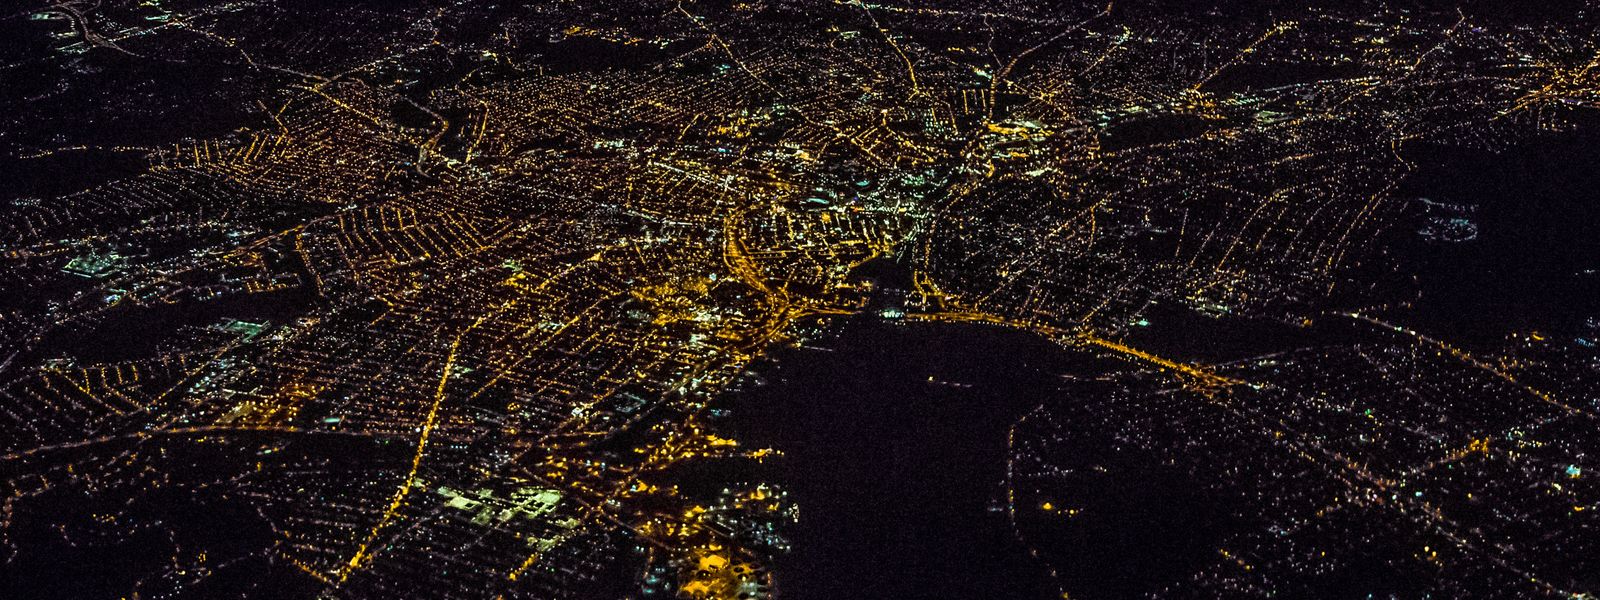 Bird's eye view of a city at night with lights shining